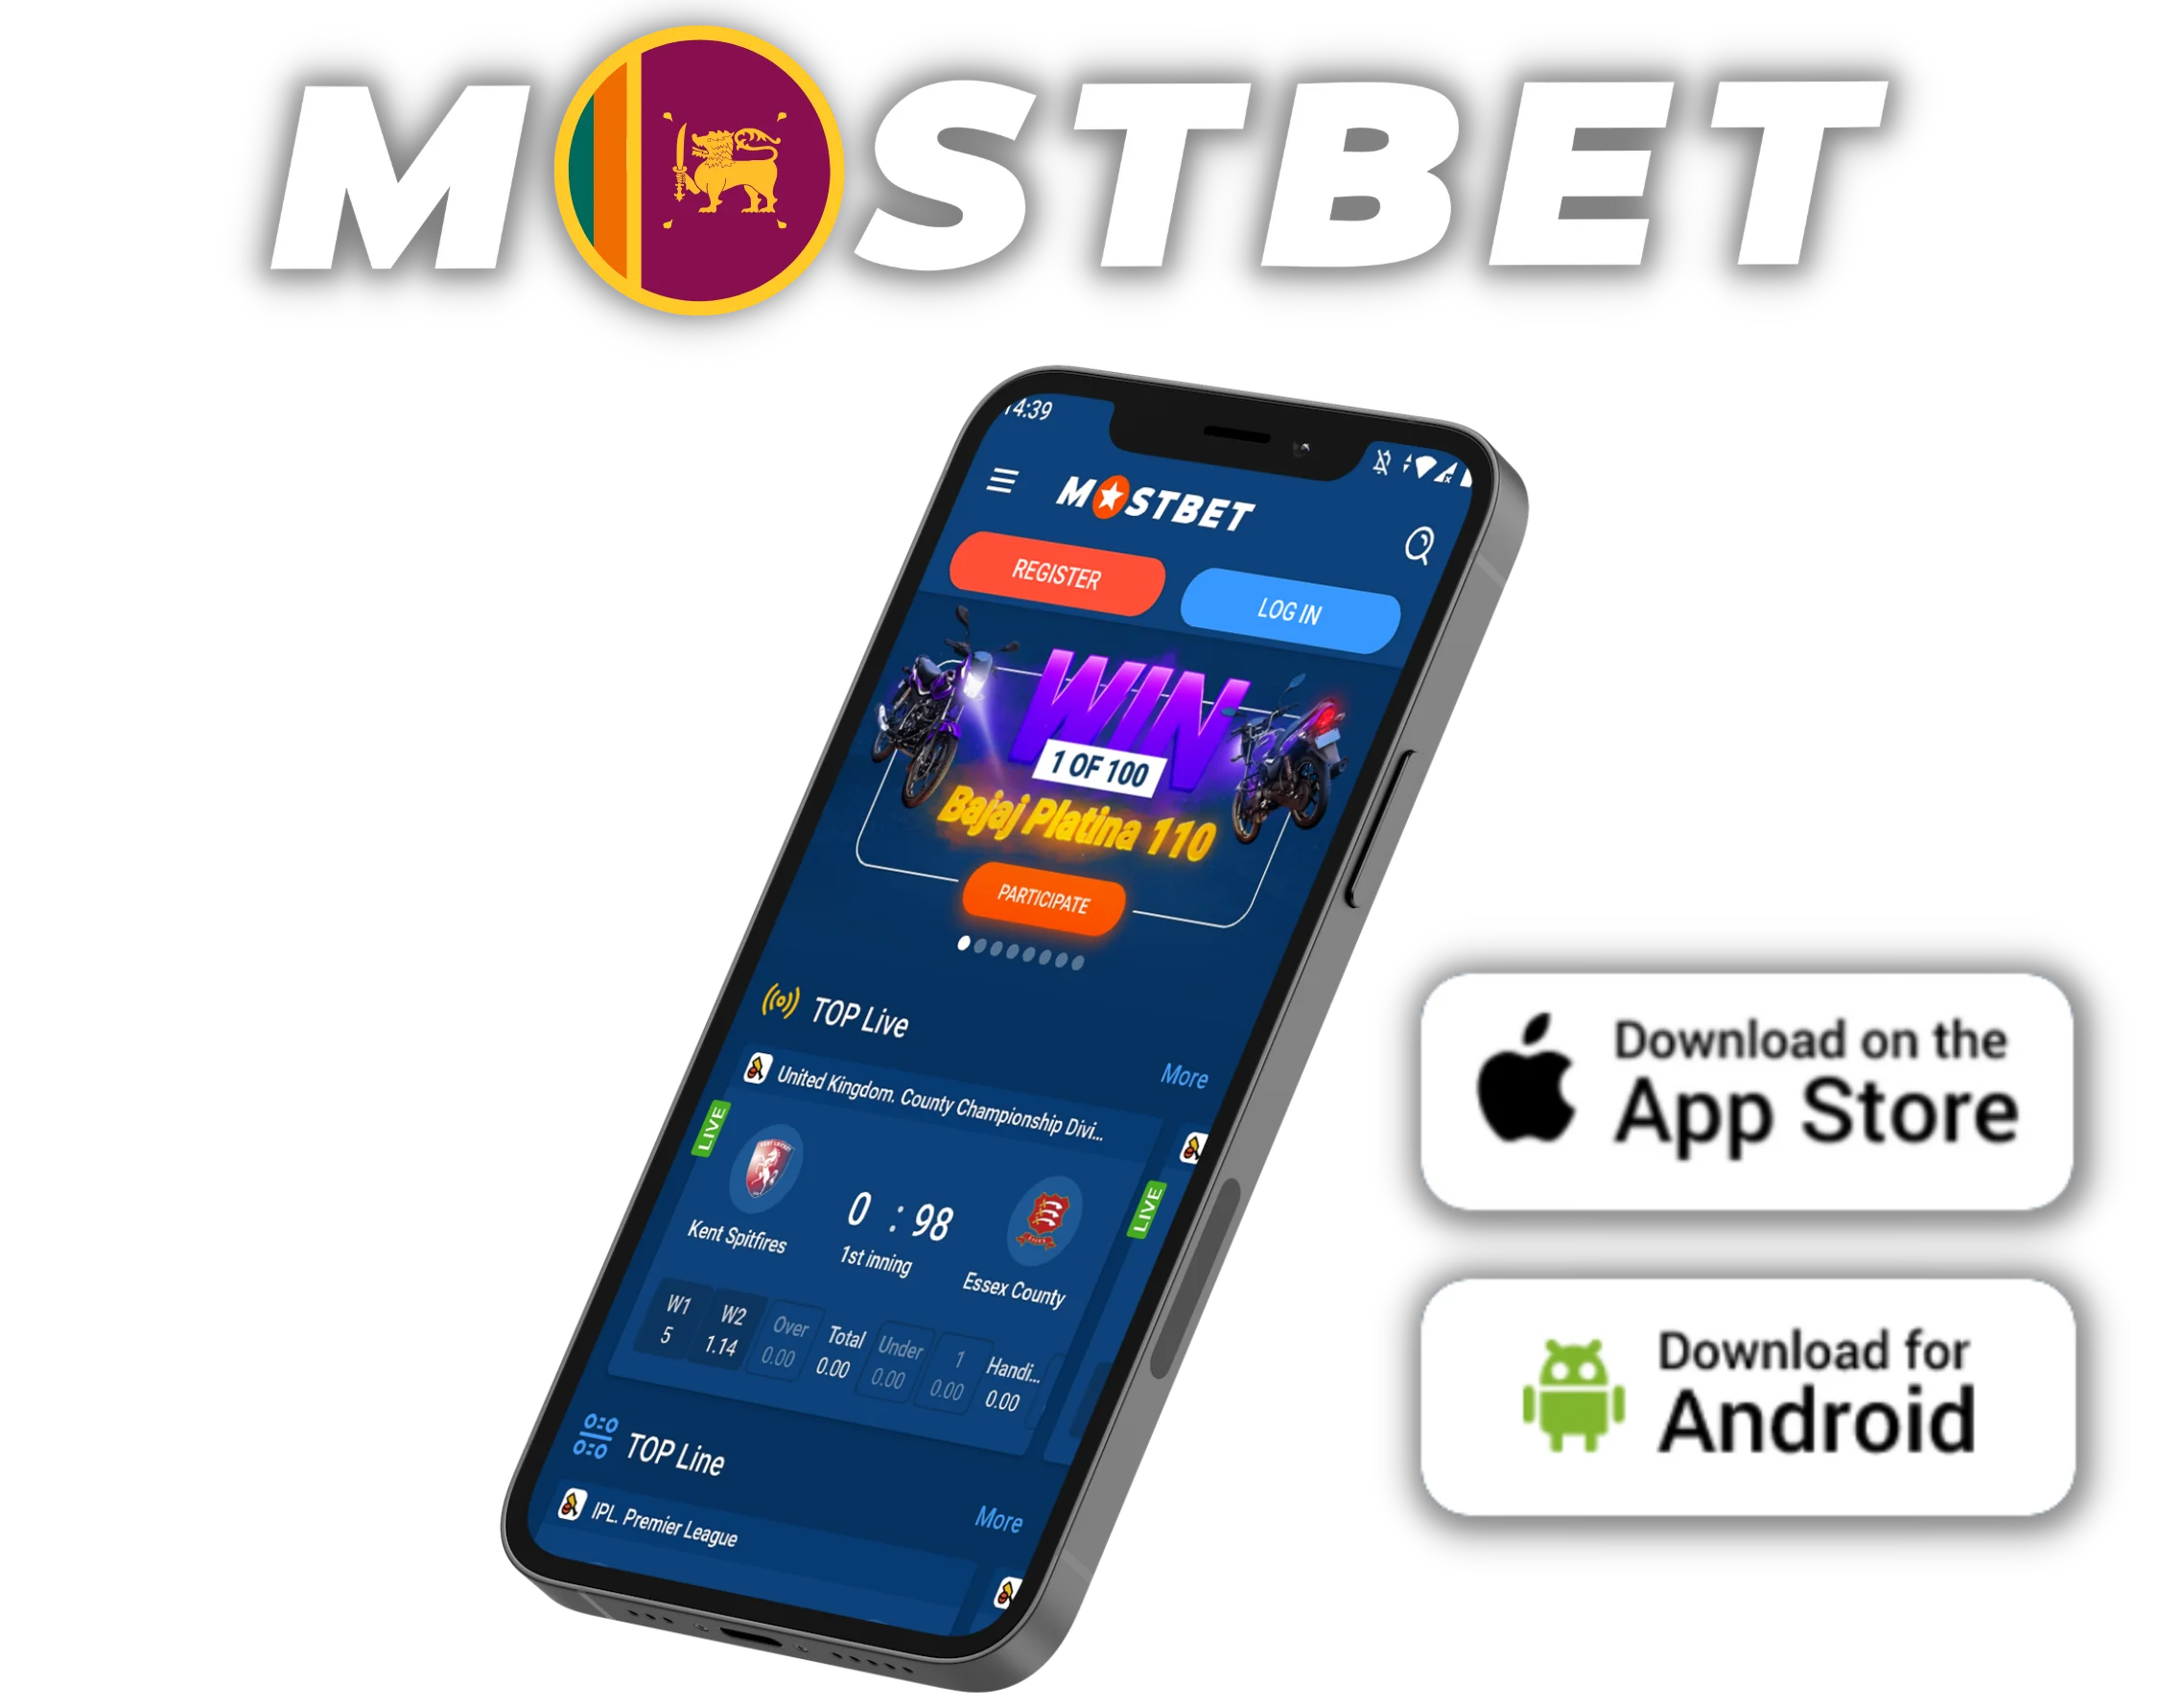 9 Easy Ways To Mostbet betting company and casino in India Without Even Thinking About It